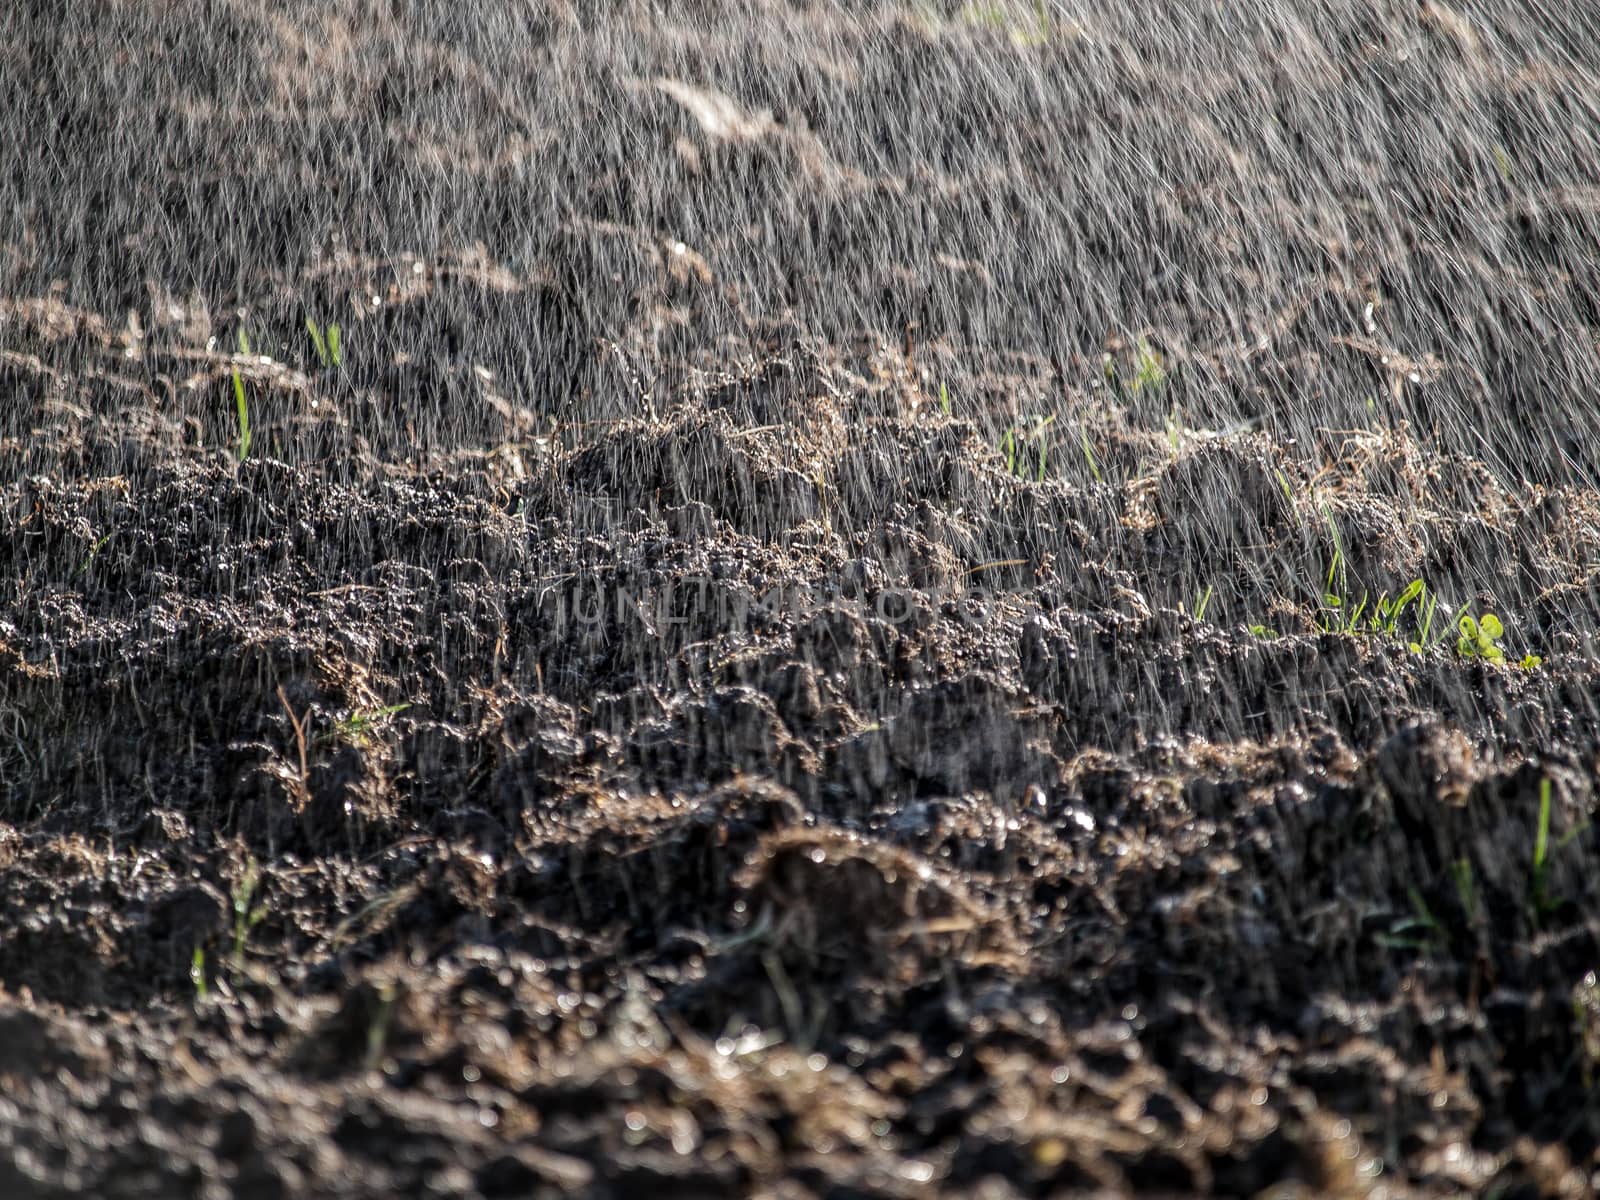 Sprayed drops of water falling on cultivated land like rain